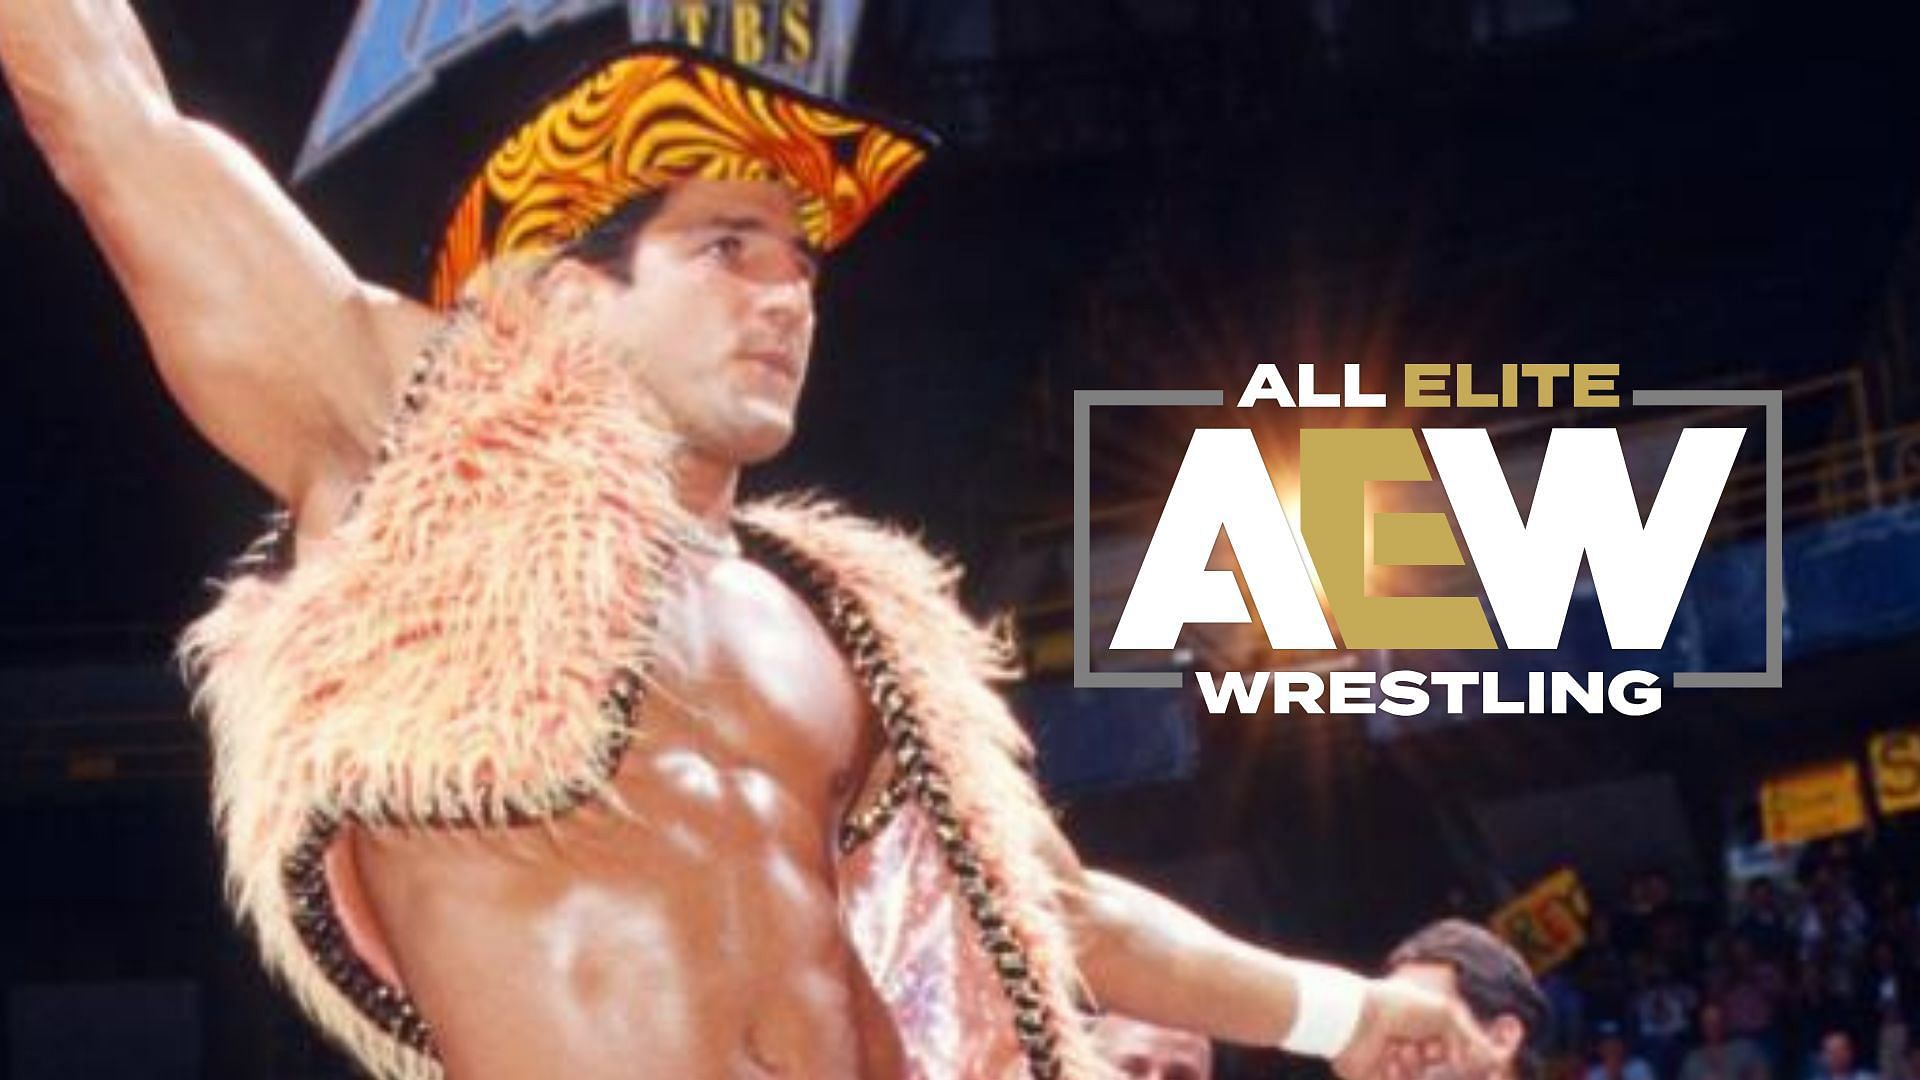 Disco Inferno has slammed the booking of a popular AEW star